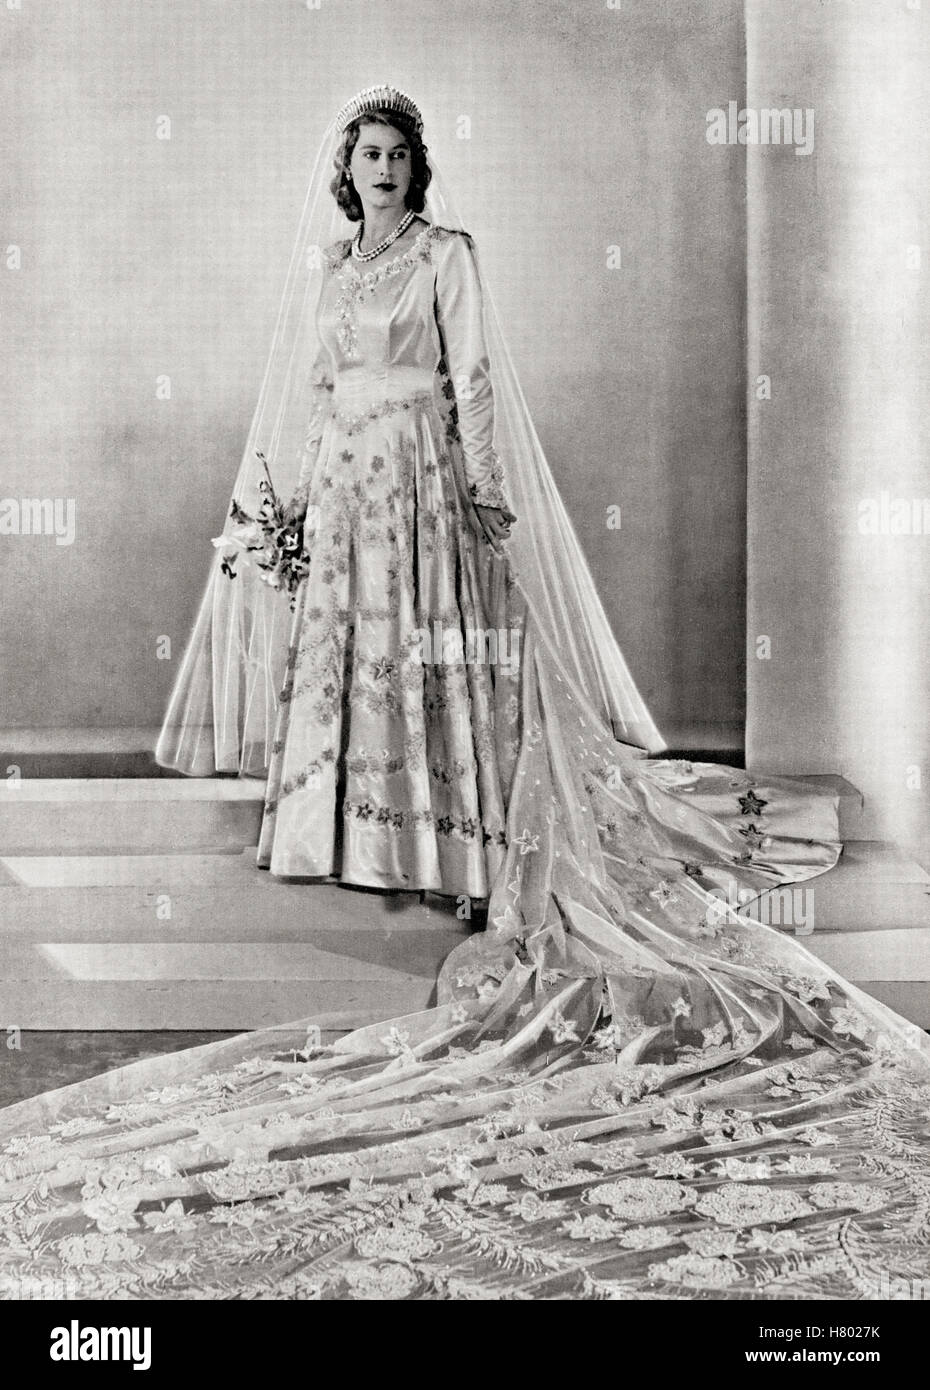 Princess Elizabeth, future Queen Elizabeth II,1926 - 2022, seen here on her wedding day.  From a photograph taken in 1947. Stock Photo